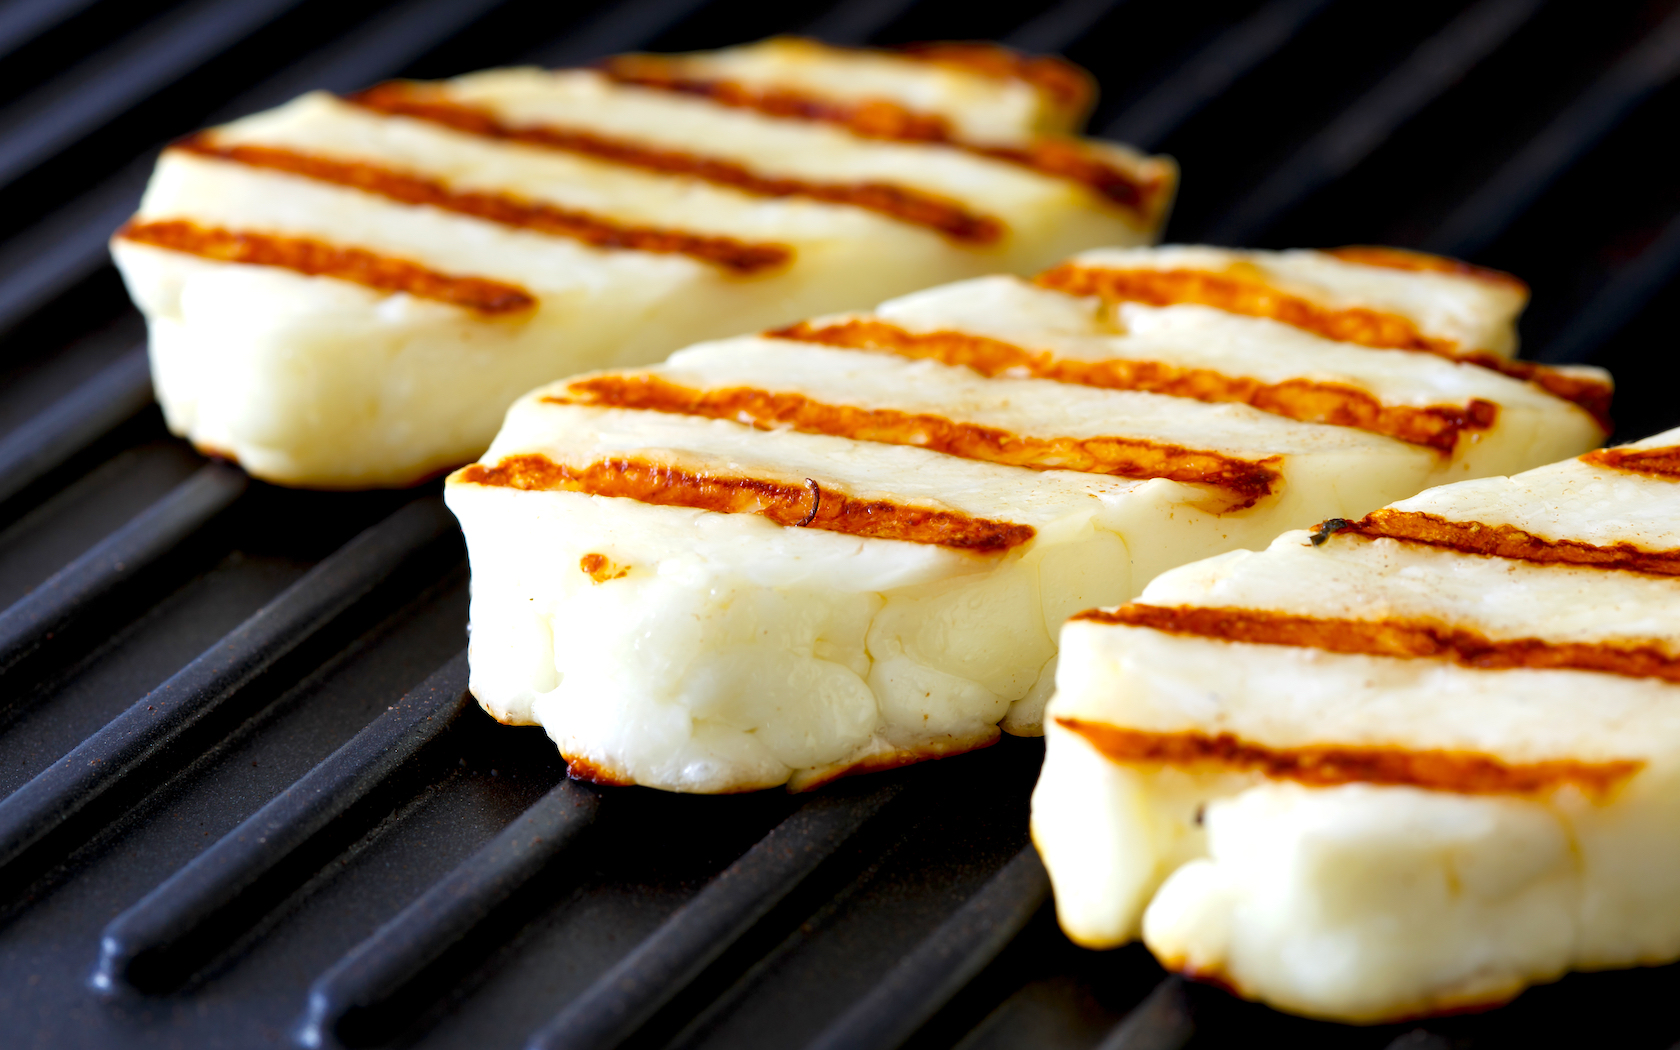 A Halloumi Festival Is Happening This Weekend In Melbourne